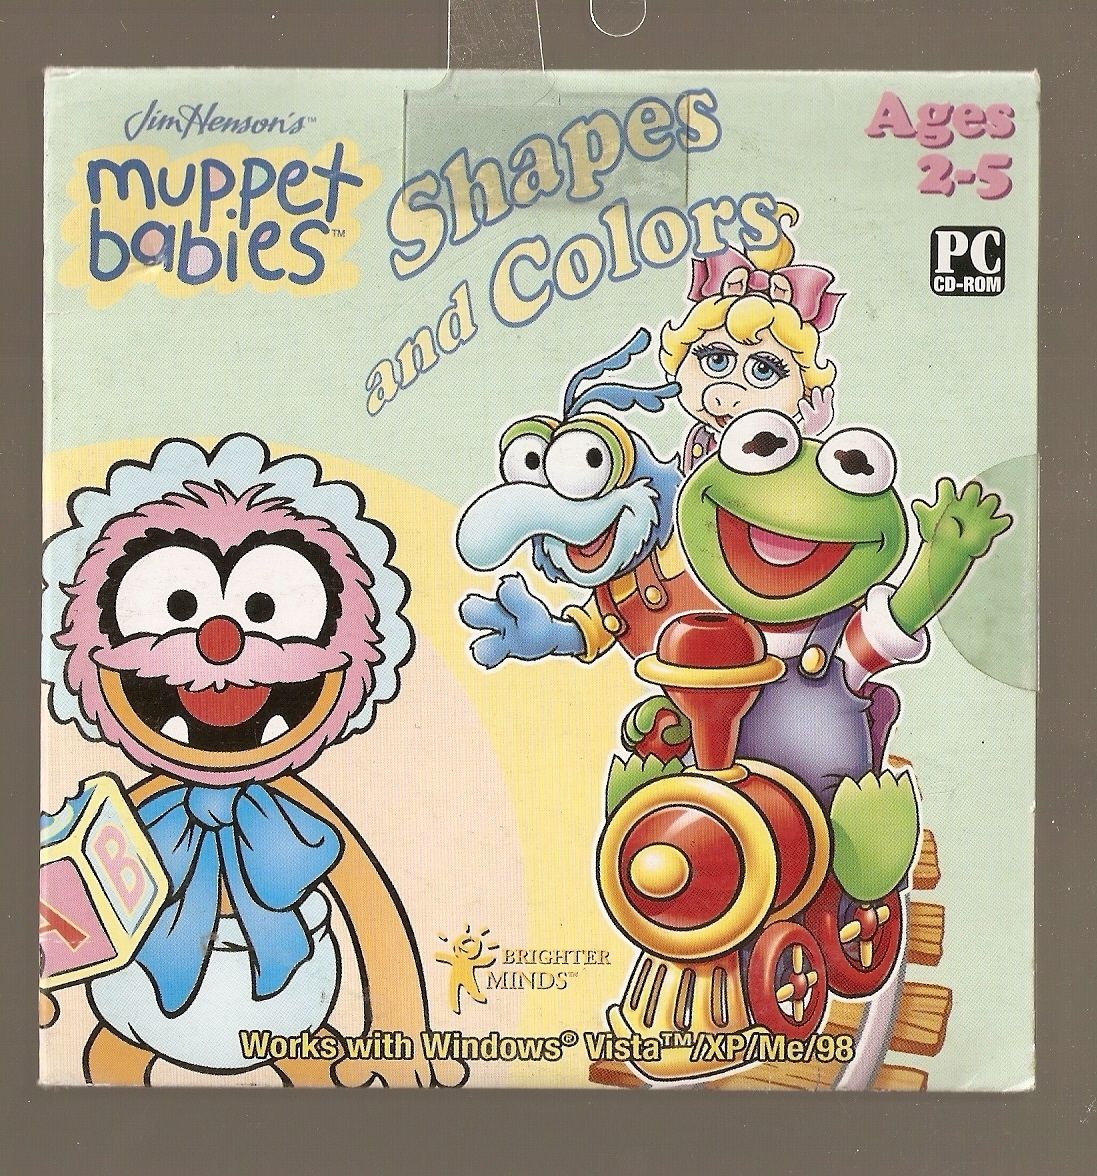 Jim Hensons Muppet Babies Shapes and Colors Interactive Software for